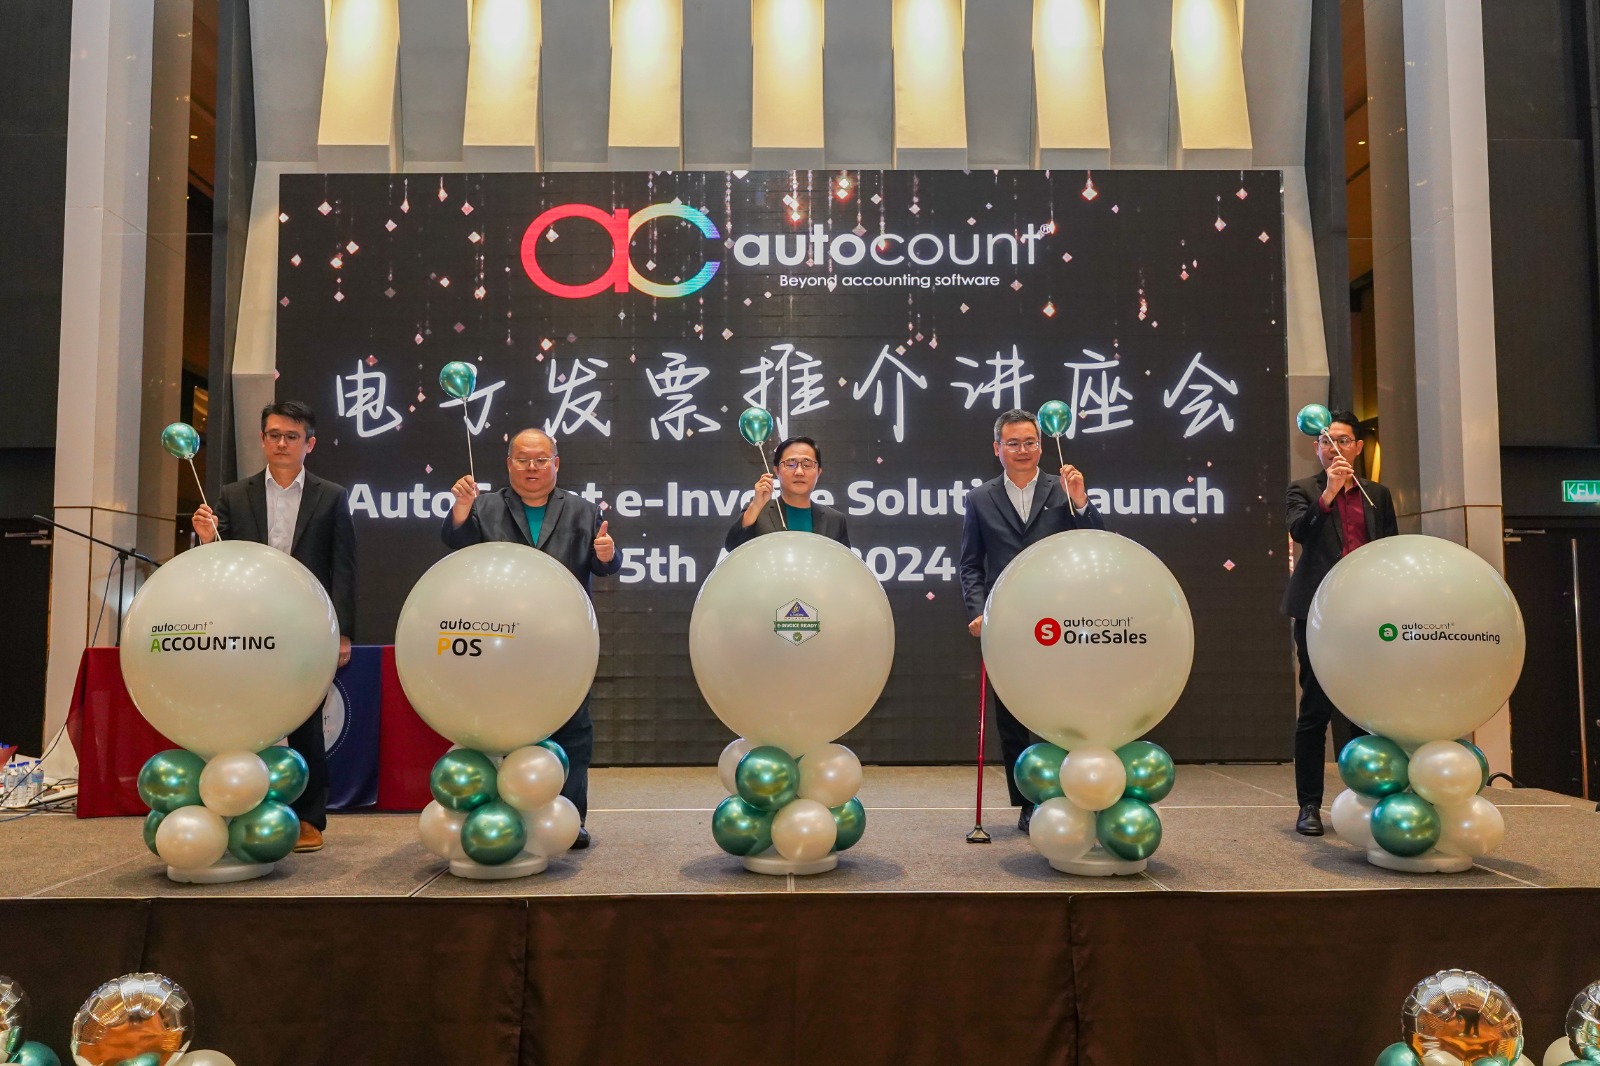 AutoCount top management members and esteemed guest speakers unveil the AutoCount e-Invoice Platform at the launch event.